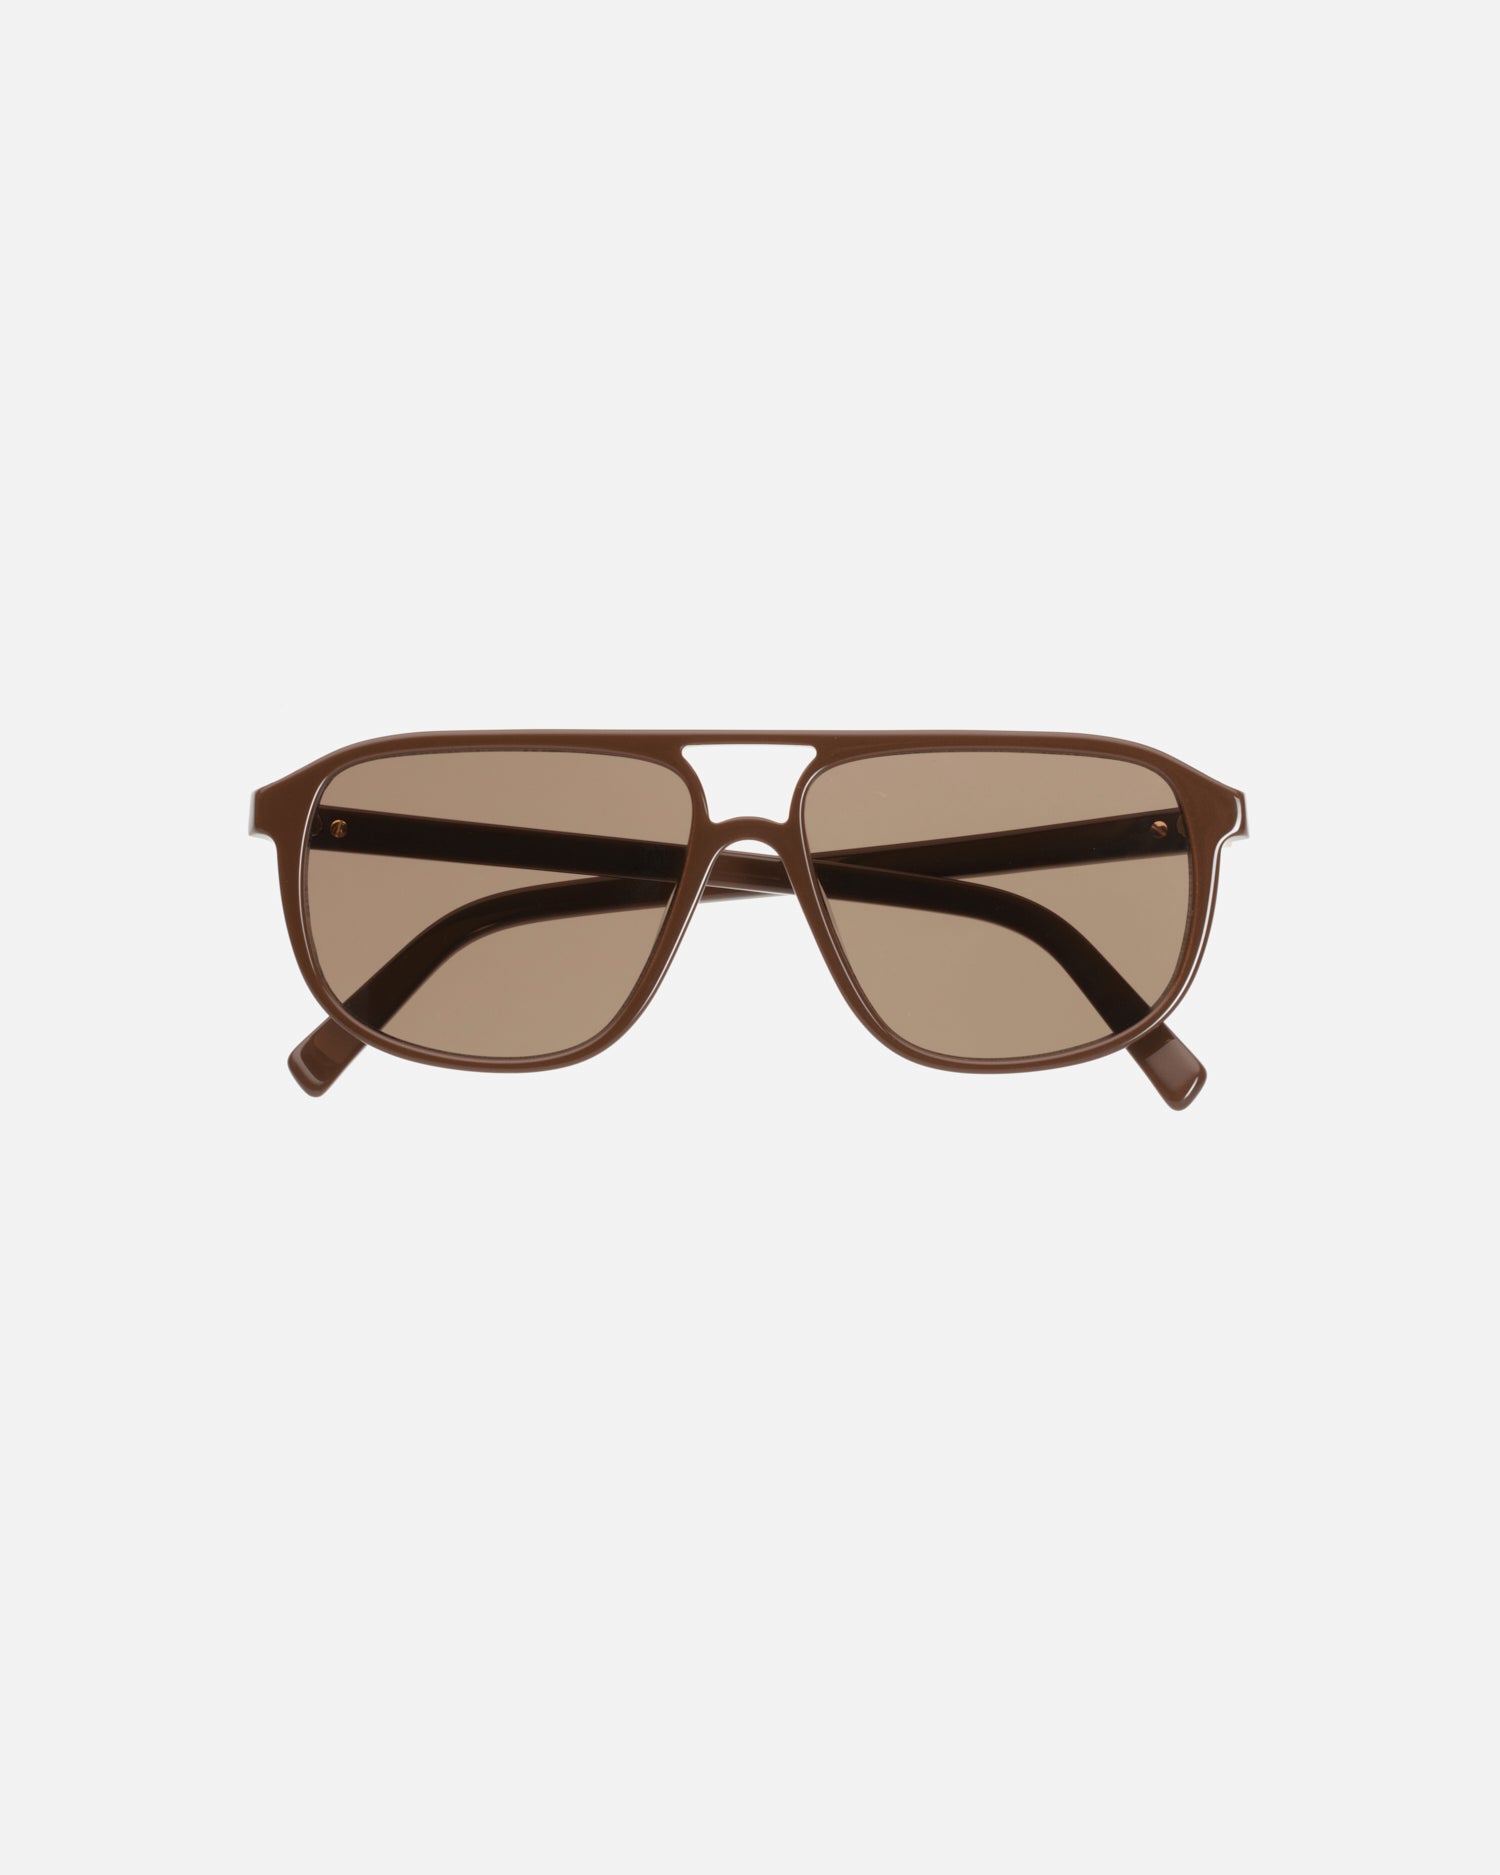 La Touriste luxe sunglasses by Velvet Canyon in Cacao